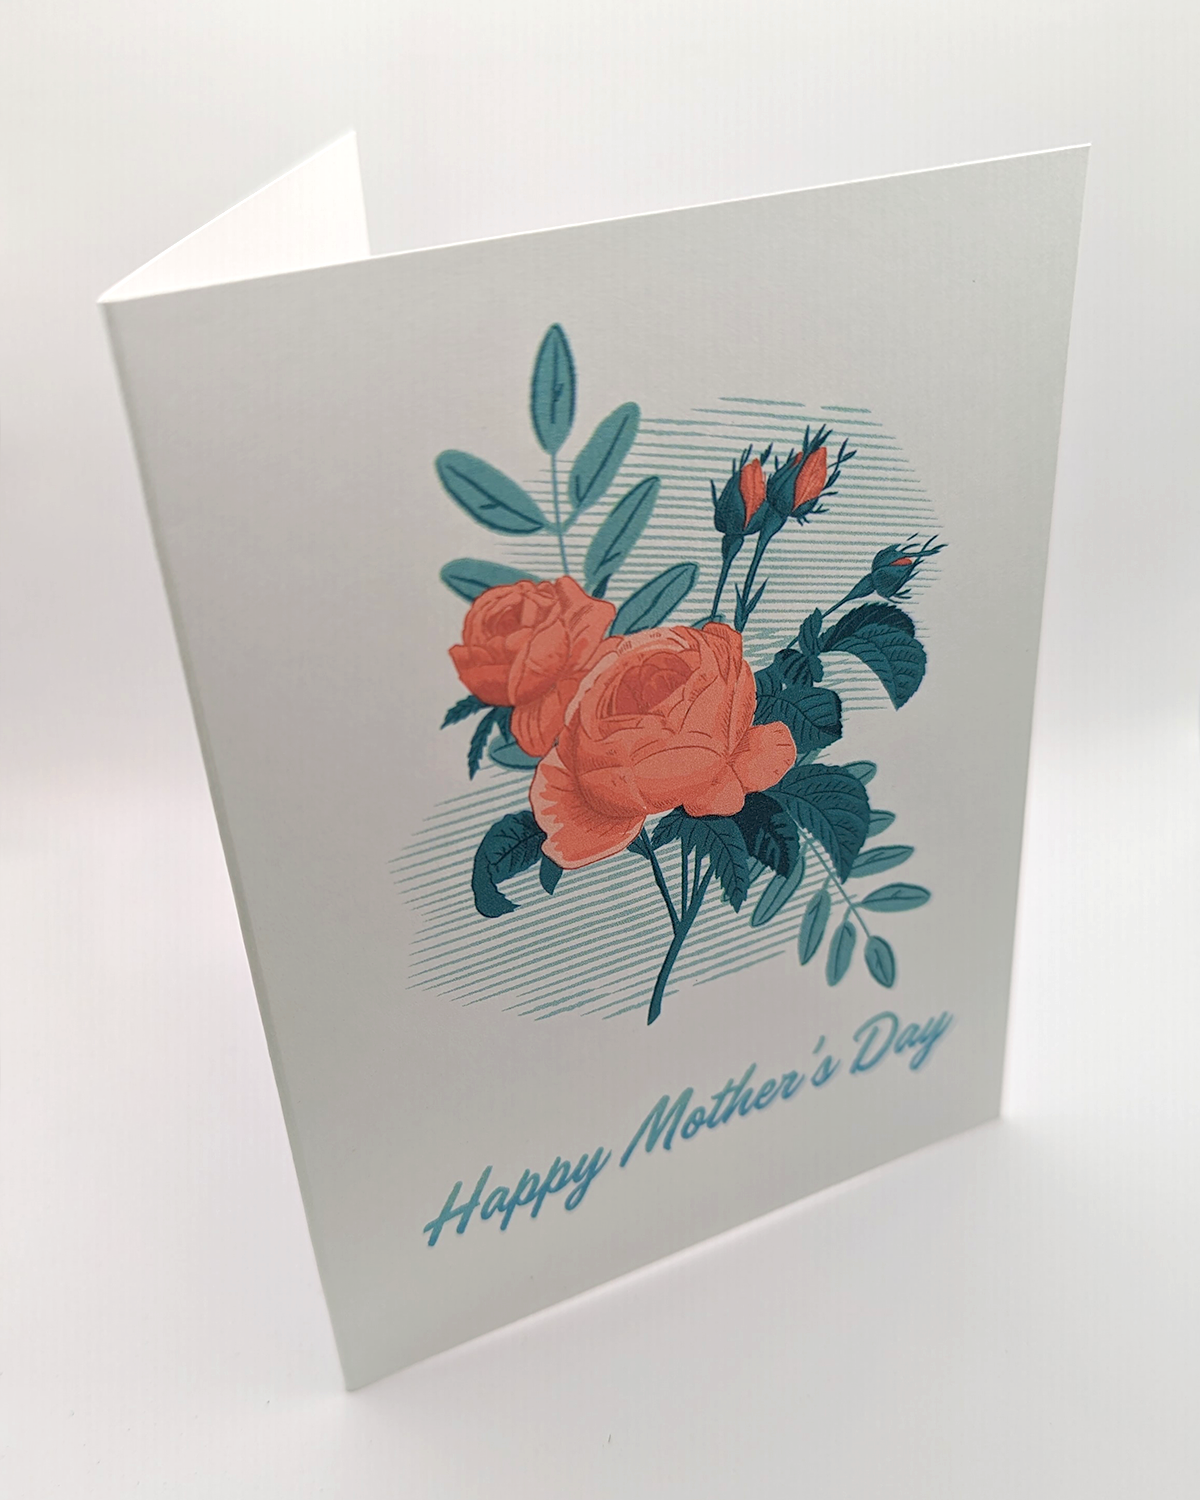 Roses Greeting Card - "Happy Mother's Day"